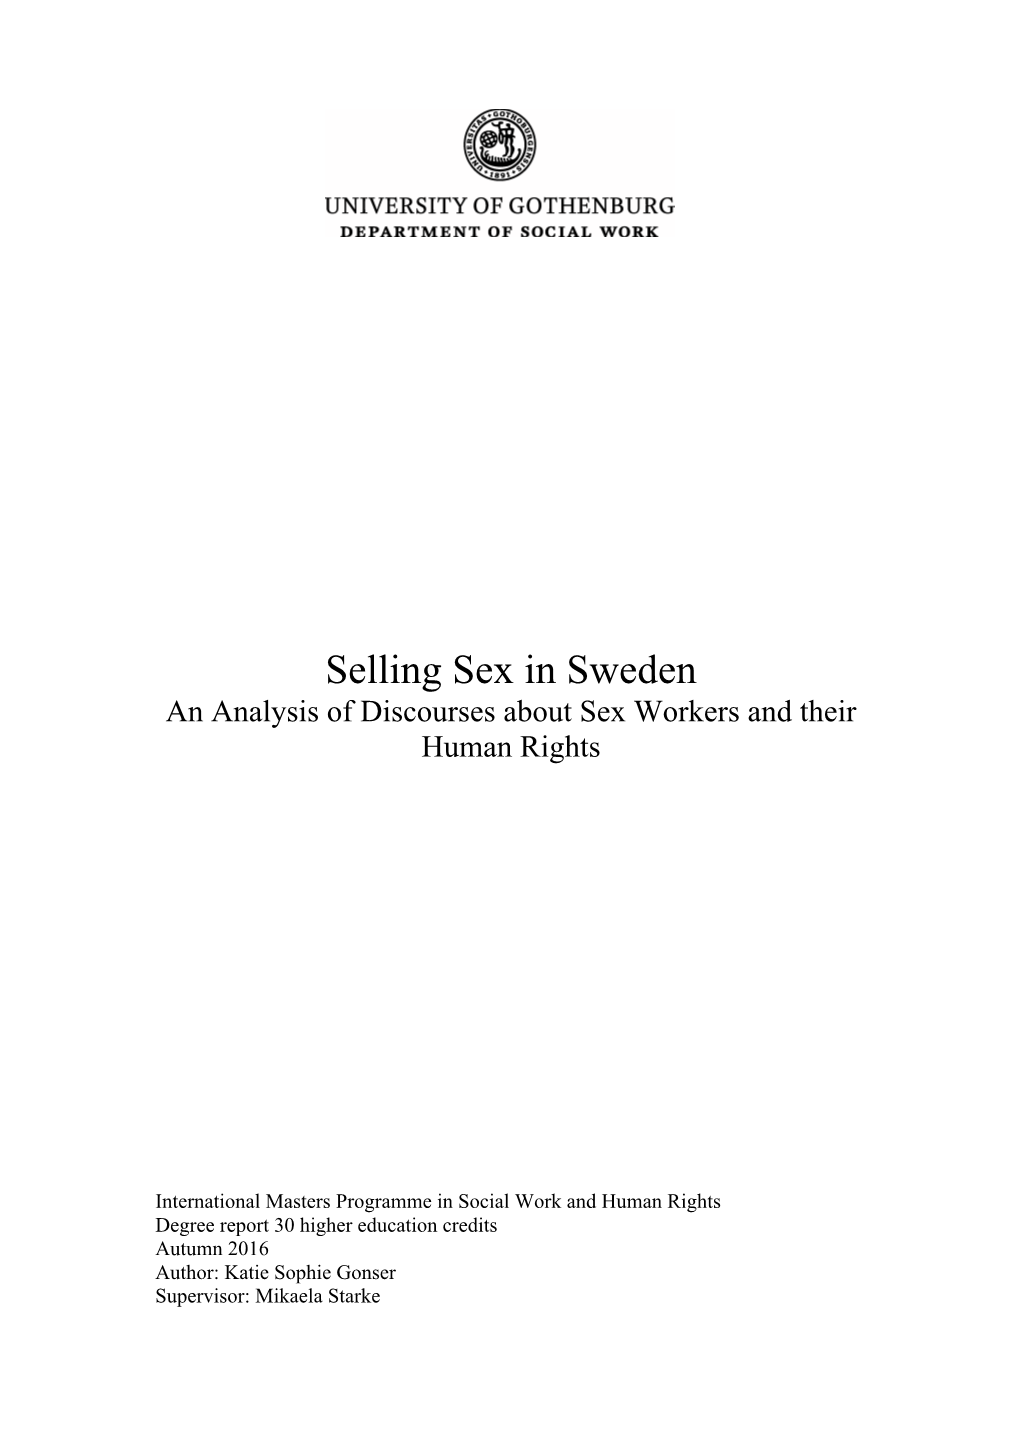 Selling Sex in Sweden an Analysis of Discourses About Sex Workers and Their Human Rights